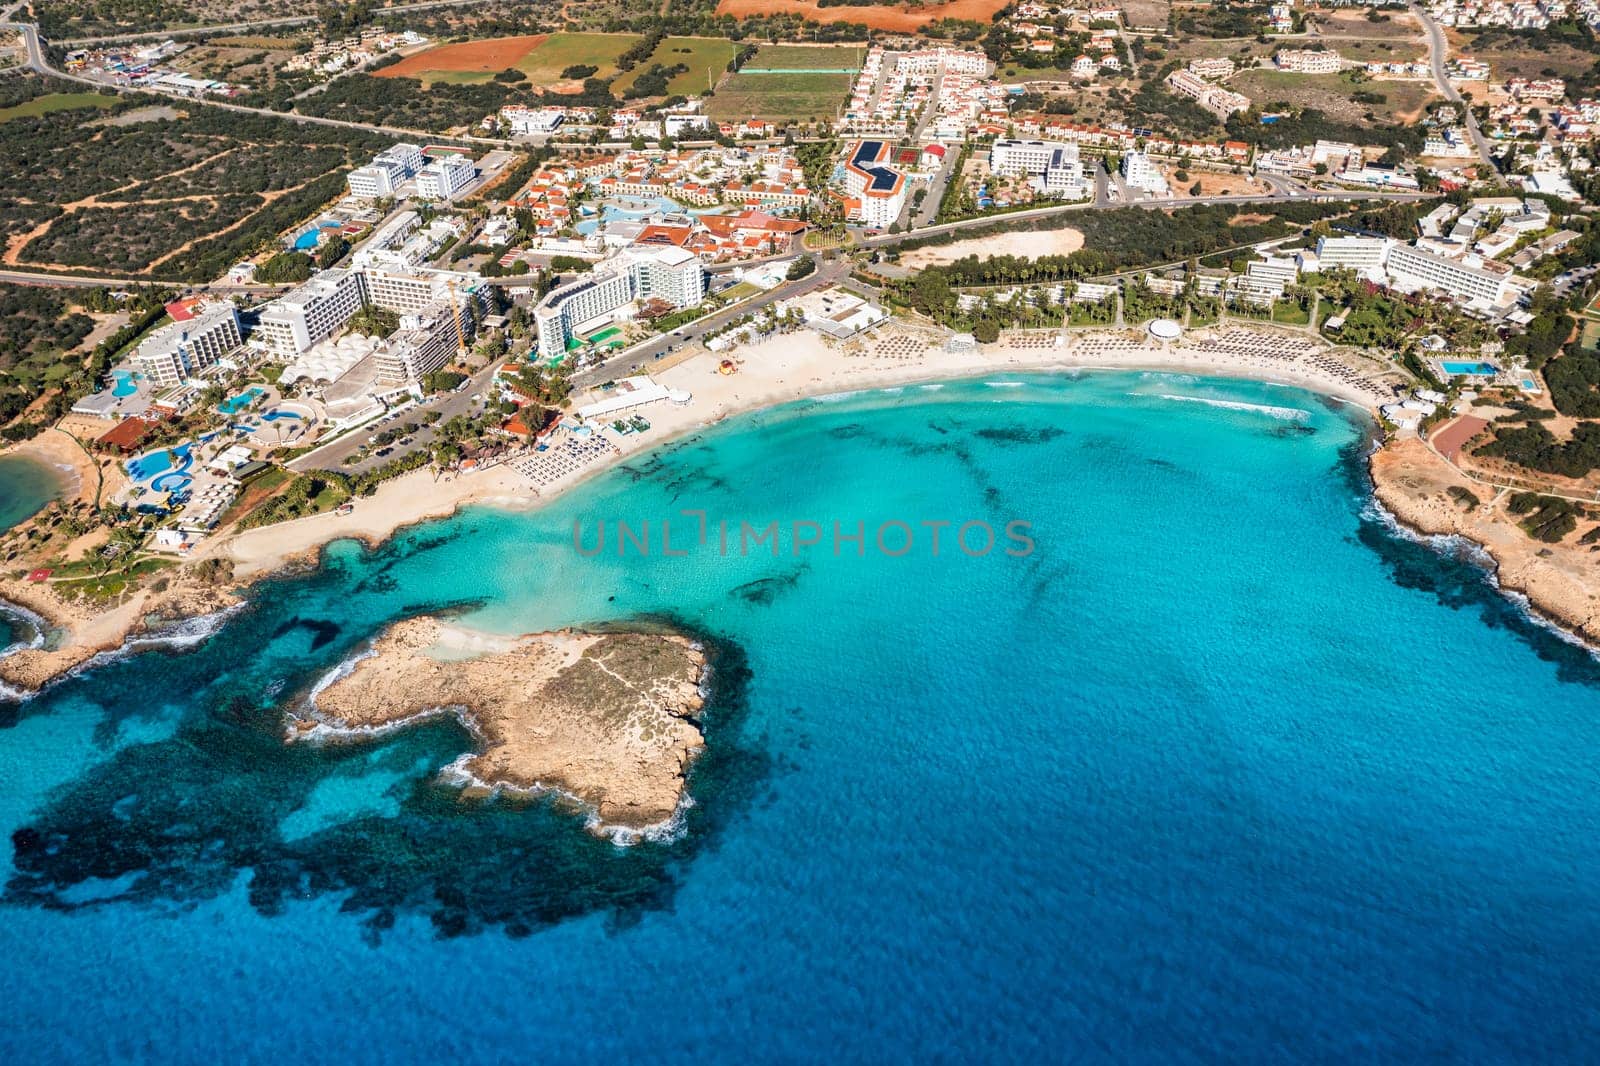 Aerial view of beautiful Nissi beach in Ayia Napa, Cyprus. Nissi beach in Ayia Napa famous tourist beach in Cyprus. A view of a azzure water and Nissi beach in Aiya Napa, Cyprus. by DaLiu